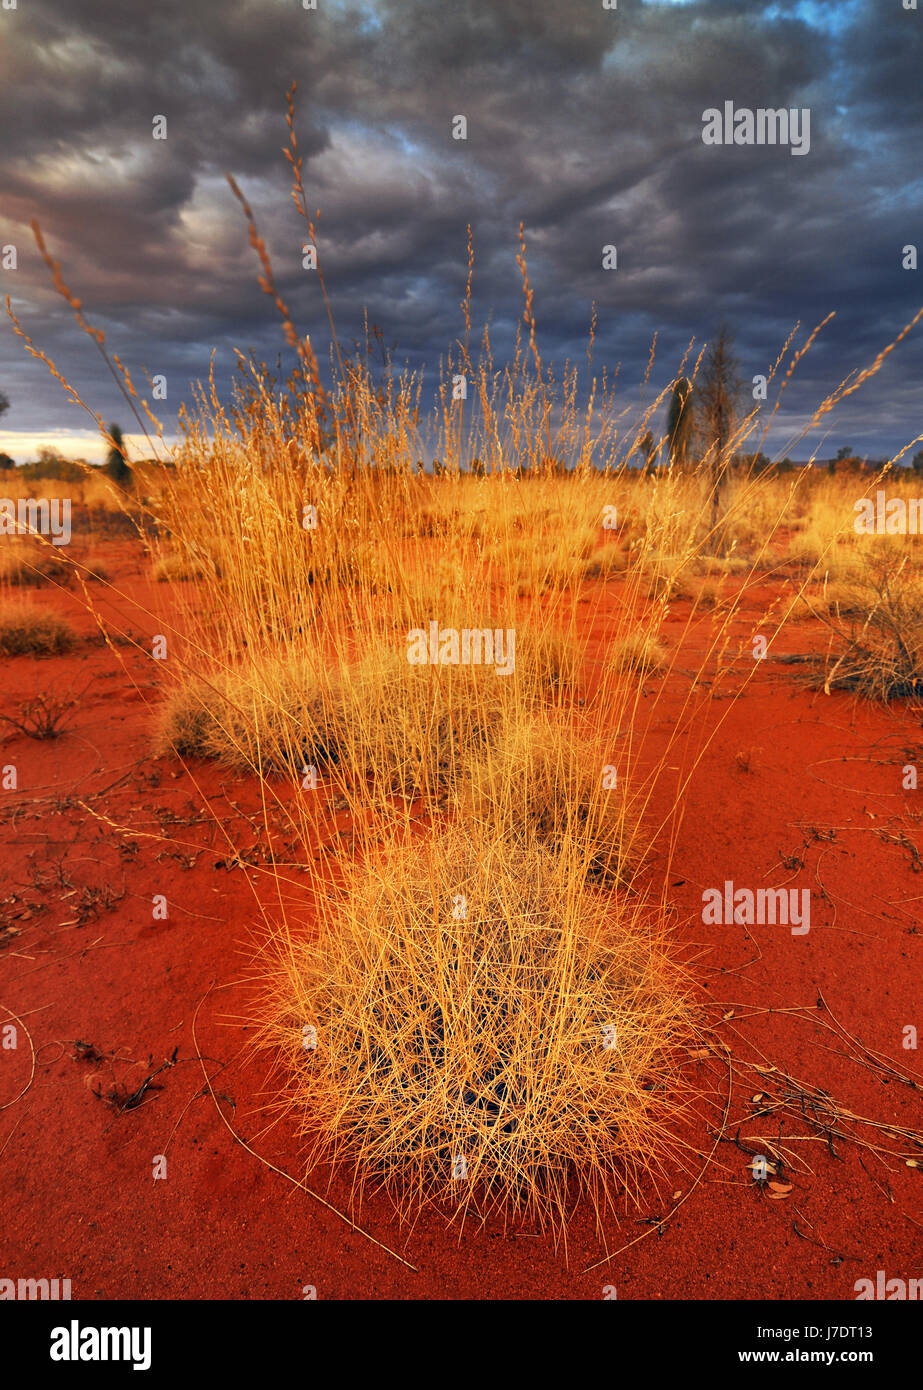 A portrait view of storm clouds sweeping in over the red Northern Territory desert. Desert plants dominate the foreground. Stock Photo